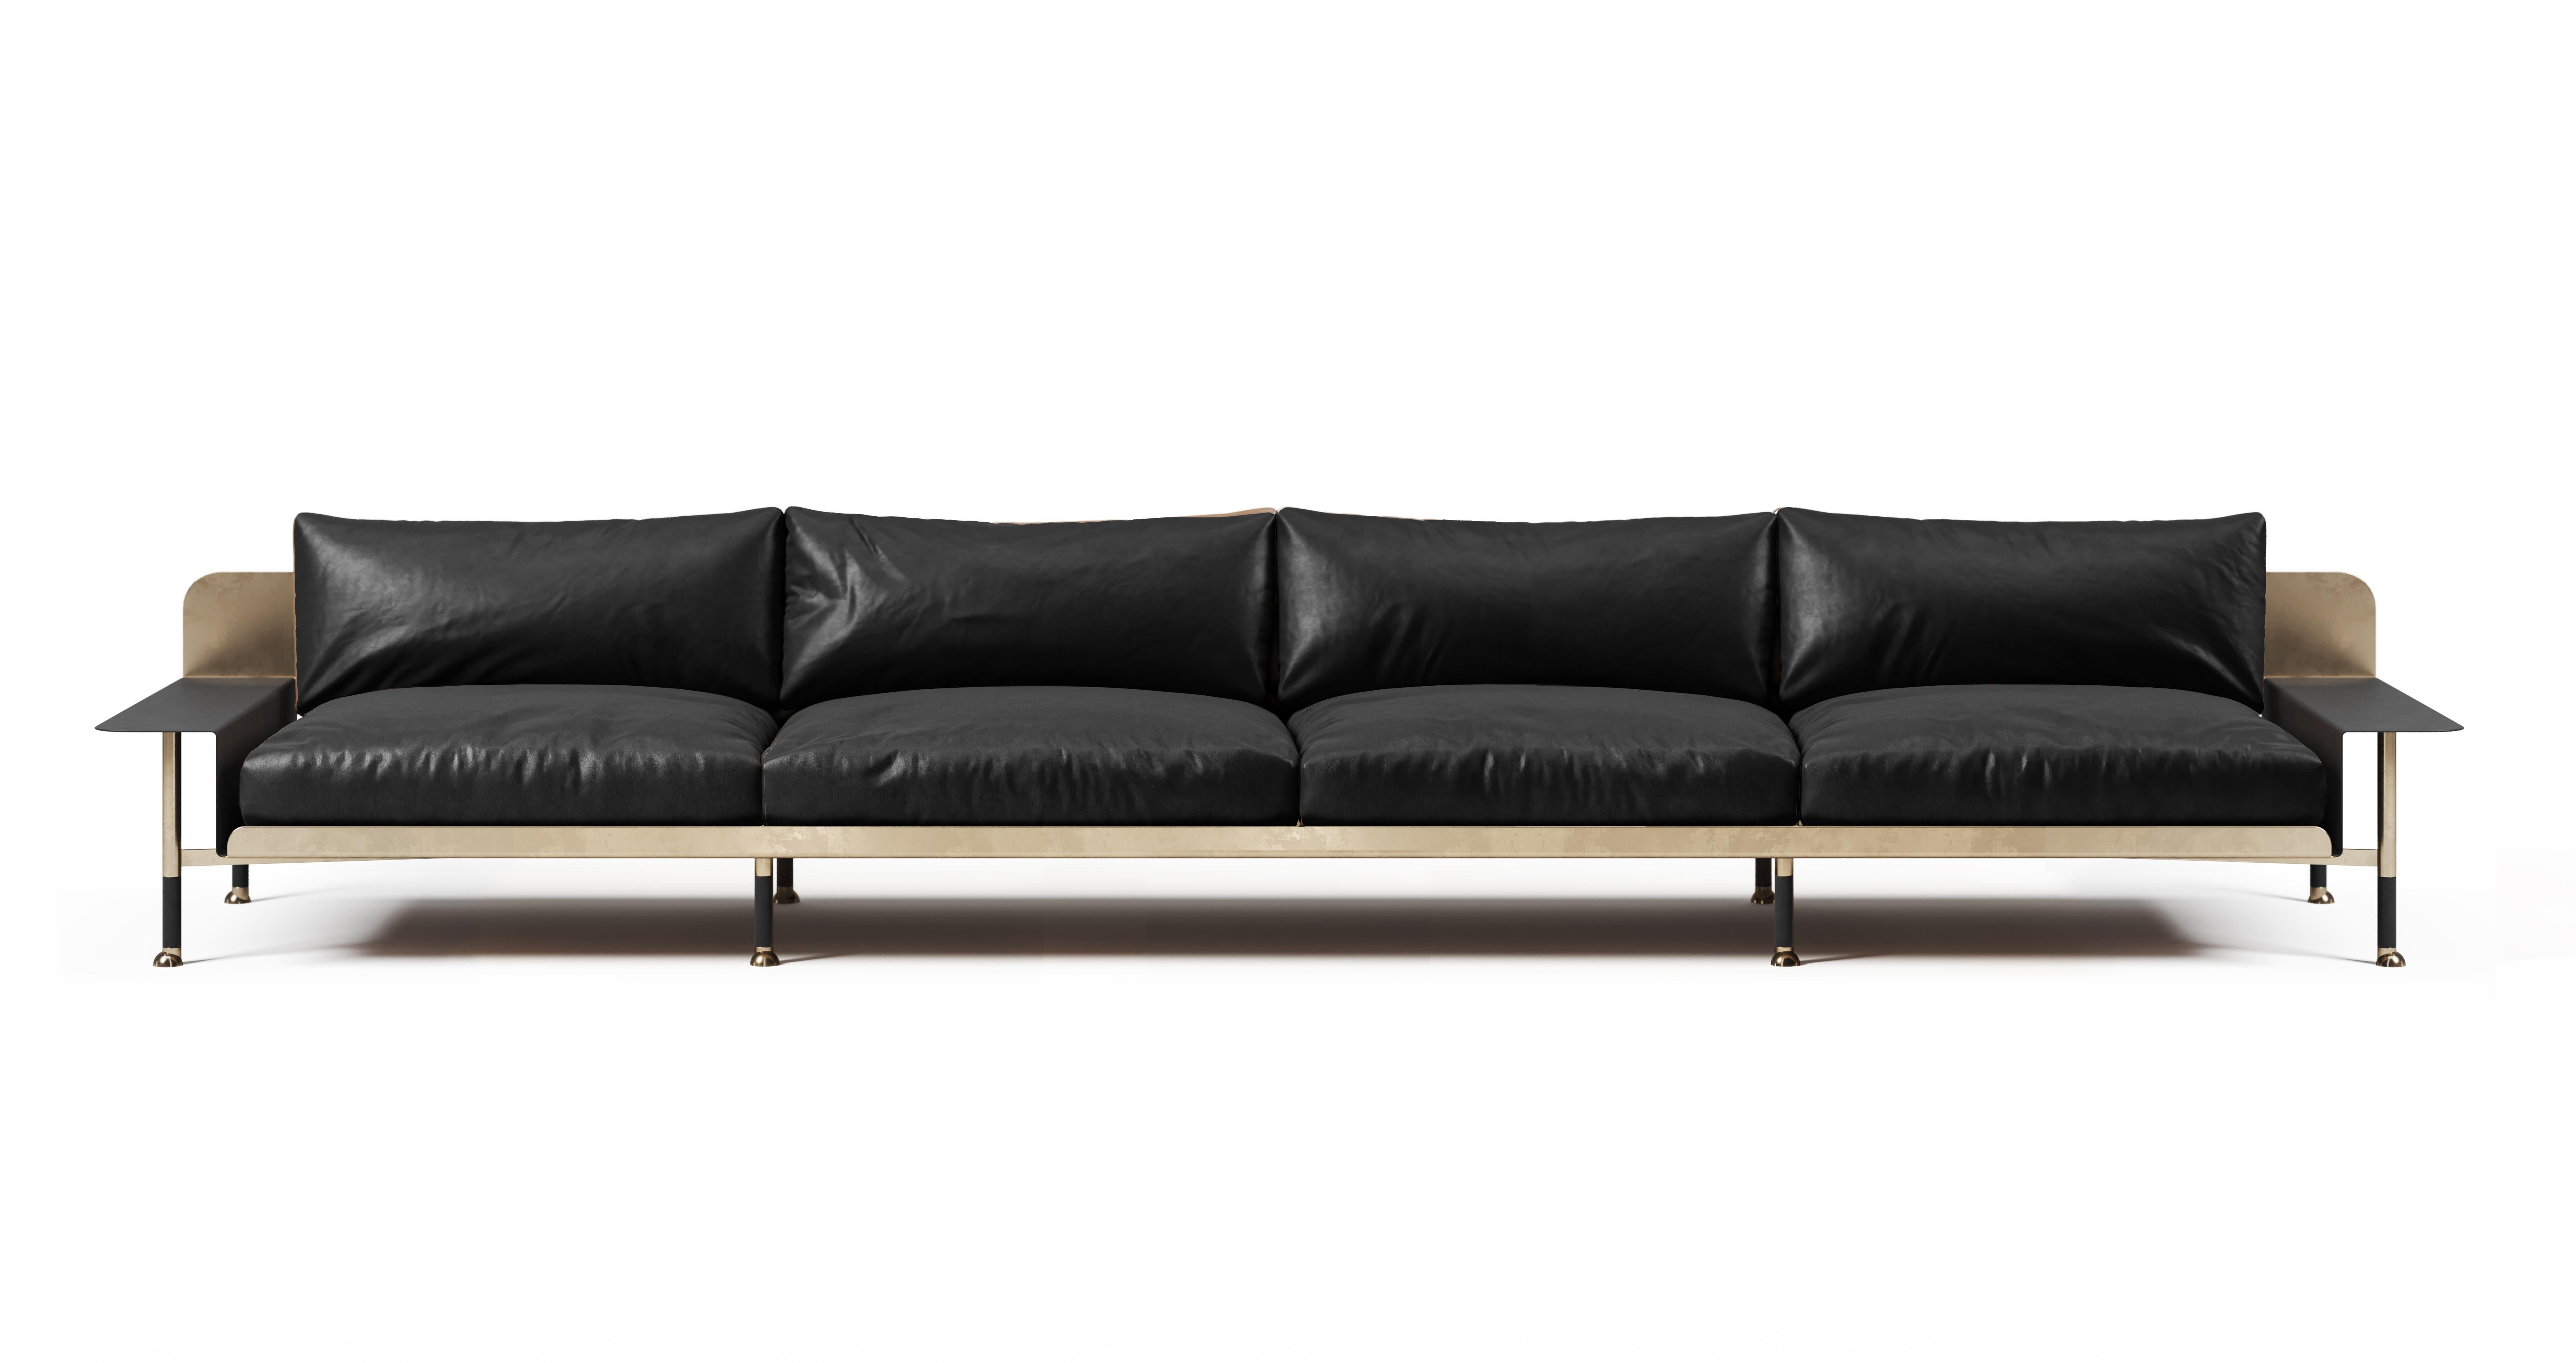 A classic sofa shape, interpreted through our lens. A versatile yet livable statement piece and a work of art that explores soft brutalism, designed to age with intention and beauty. It Feels Right, It Feels Good.

Single plate folded brass or